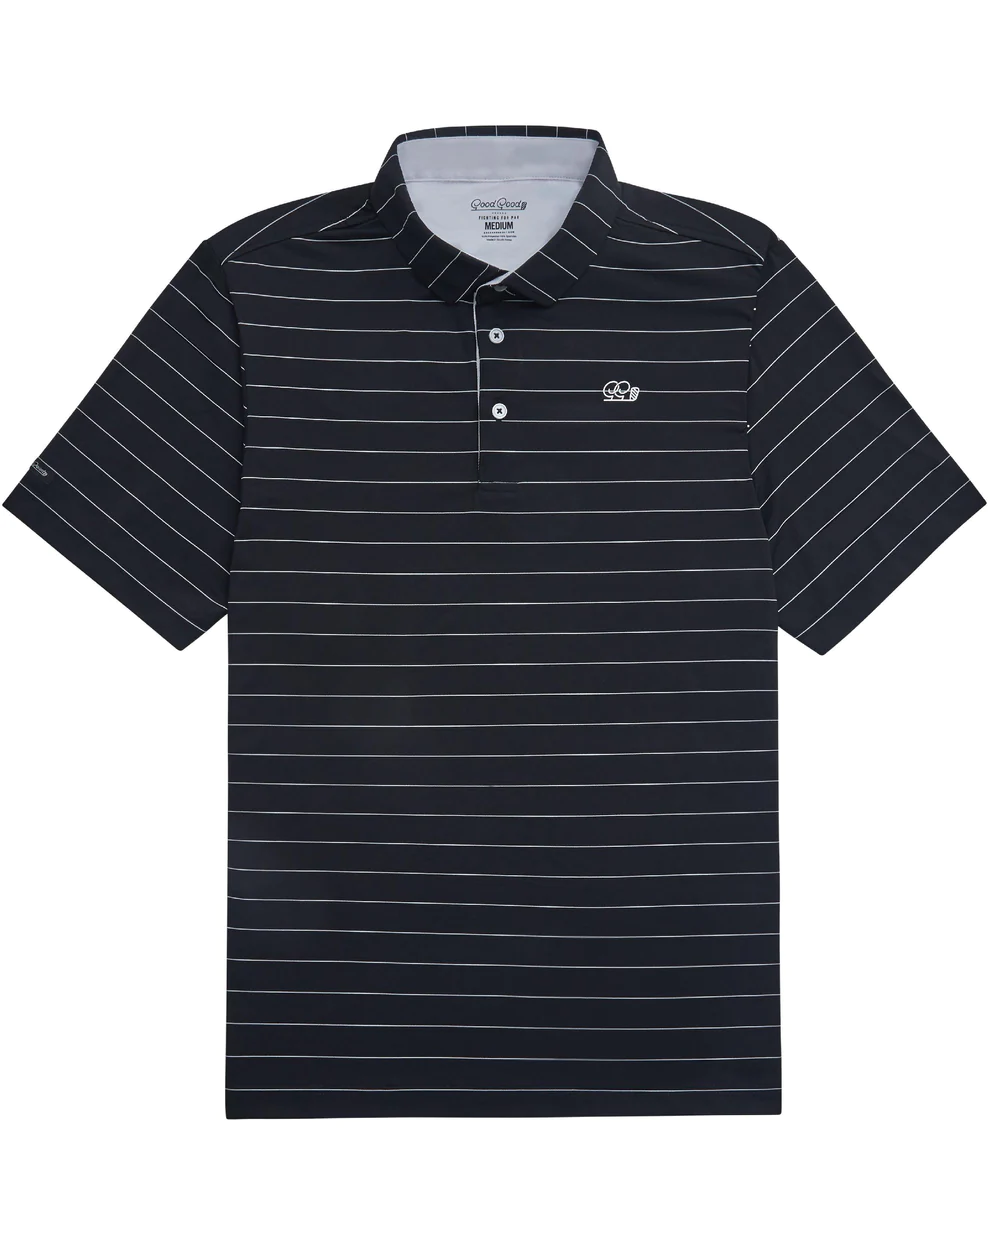 Fade Polo in Black Good Good Golf--Lemons and Limes Boutique